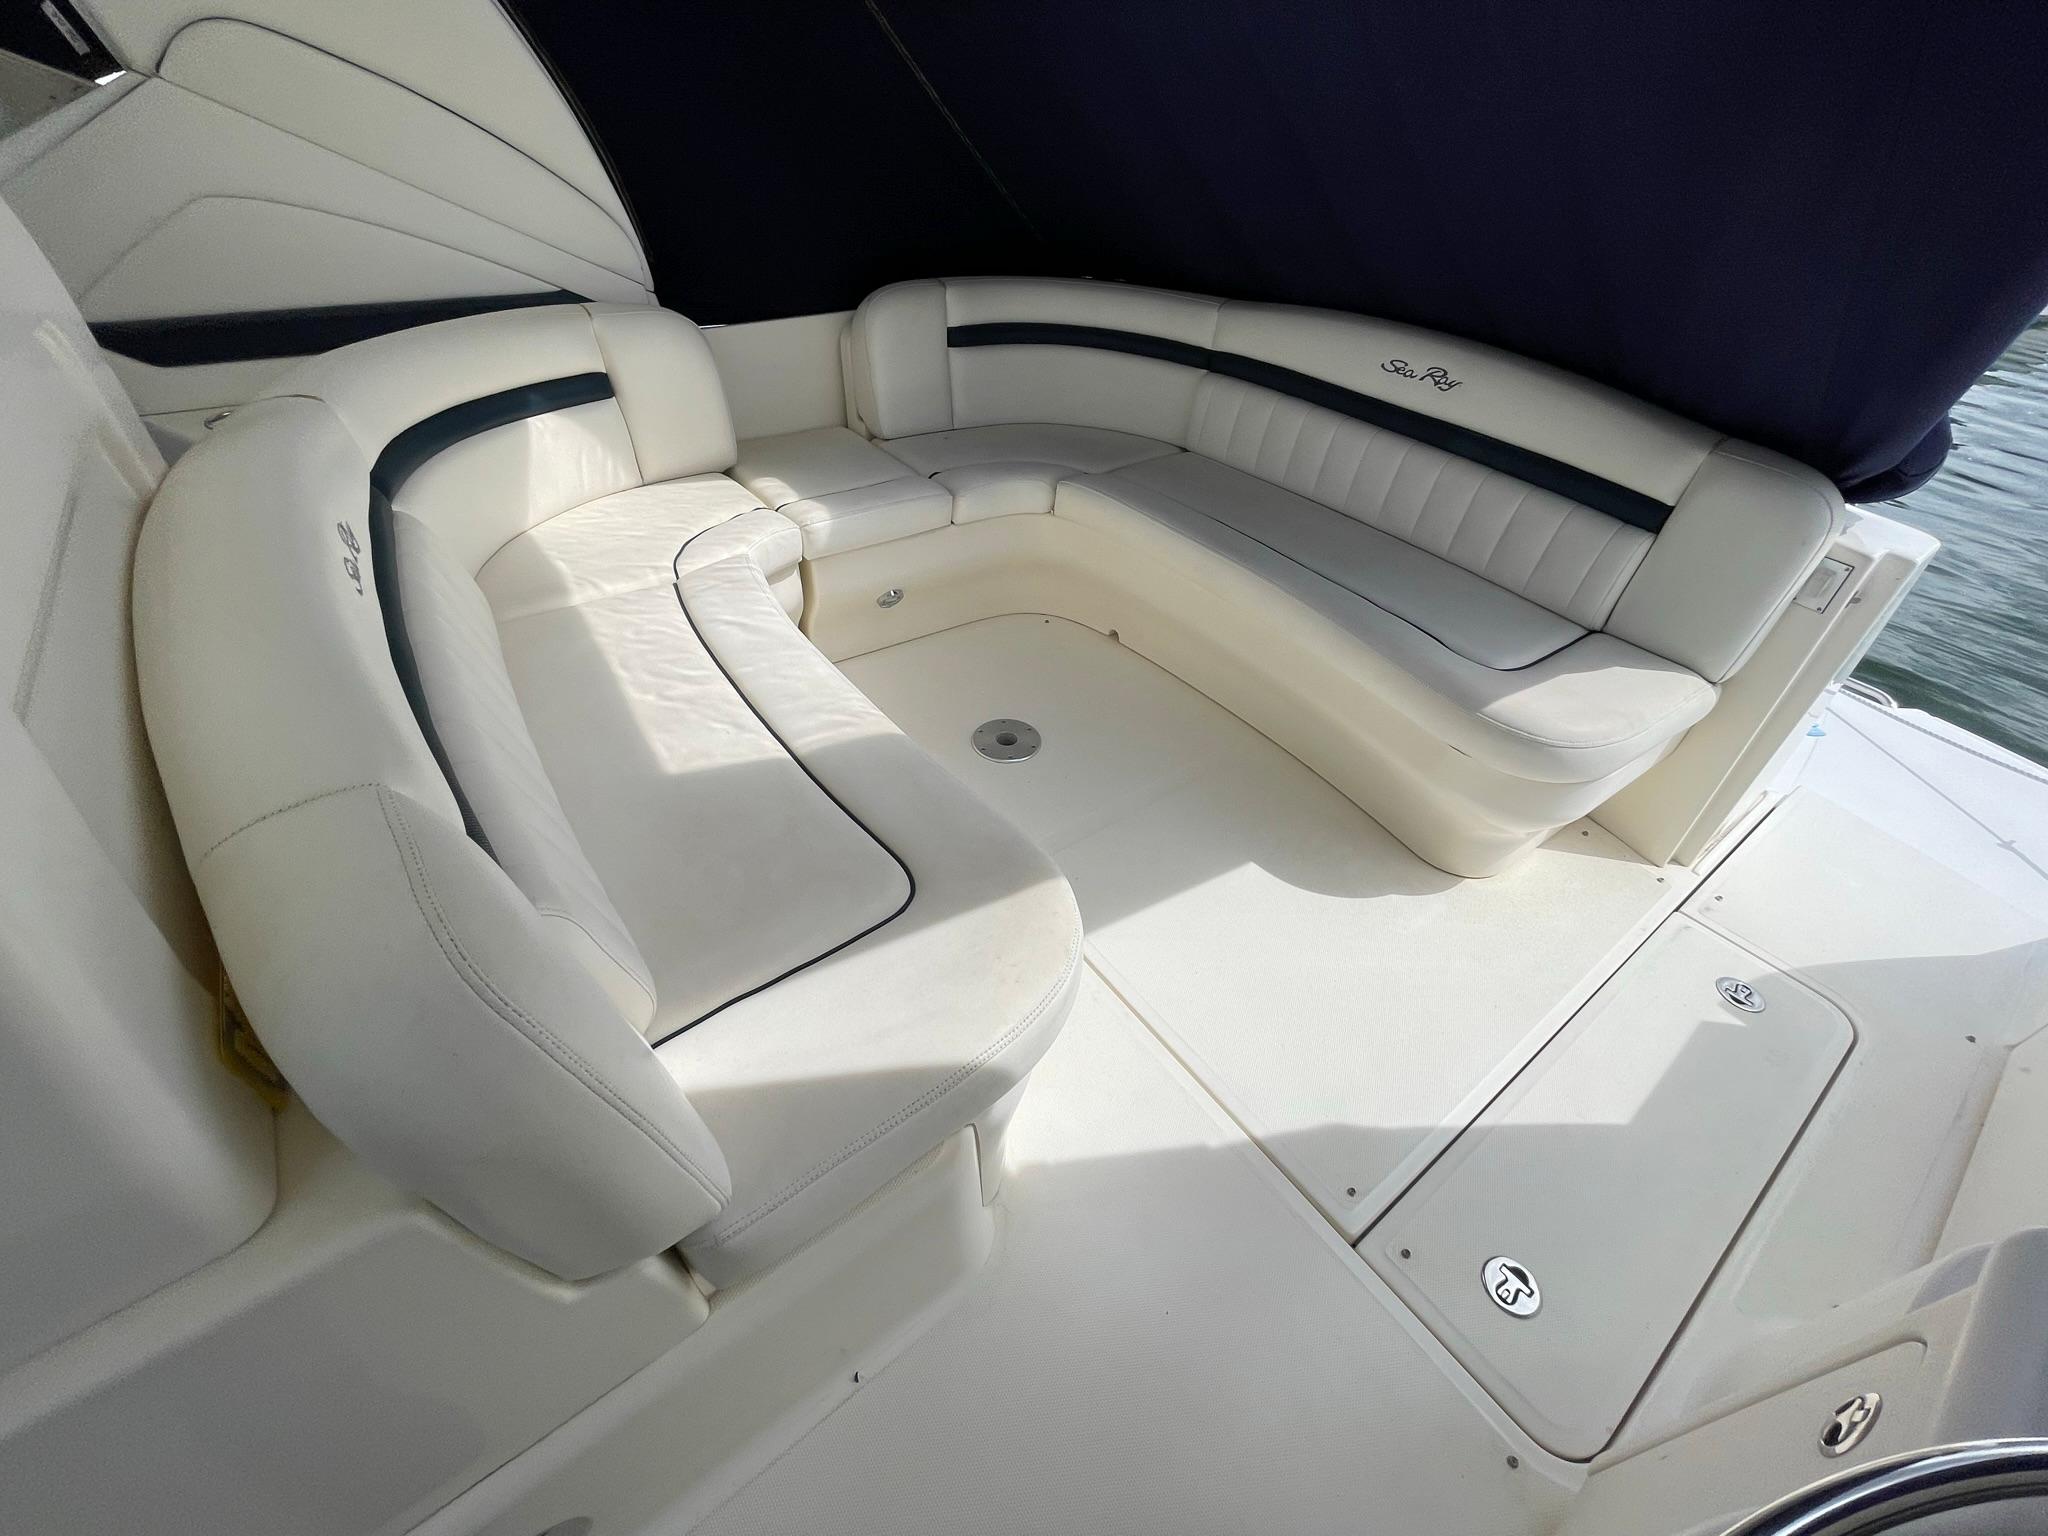 U-SHAPED COCKPIT SEATING TO STBD.